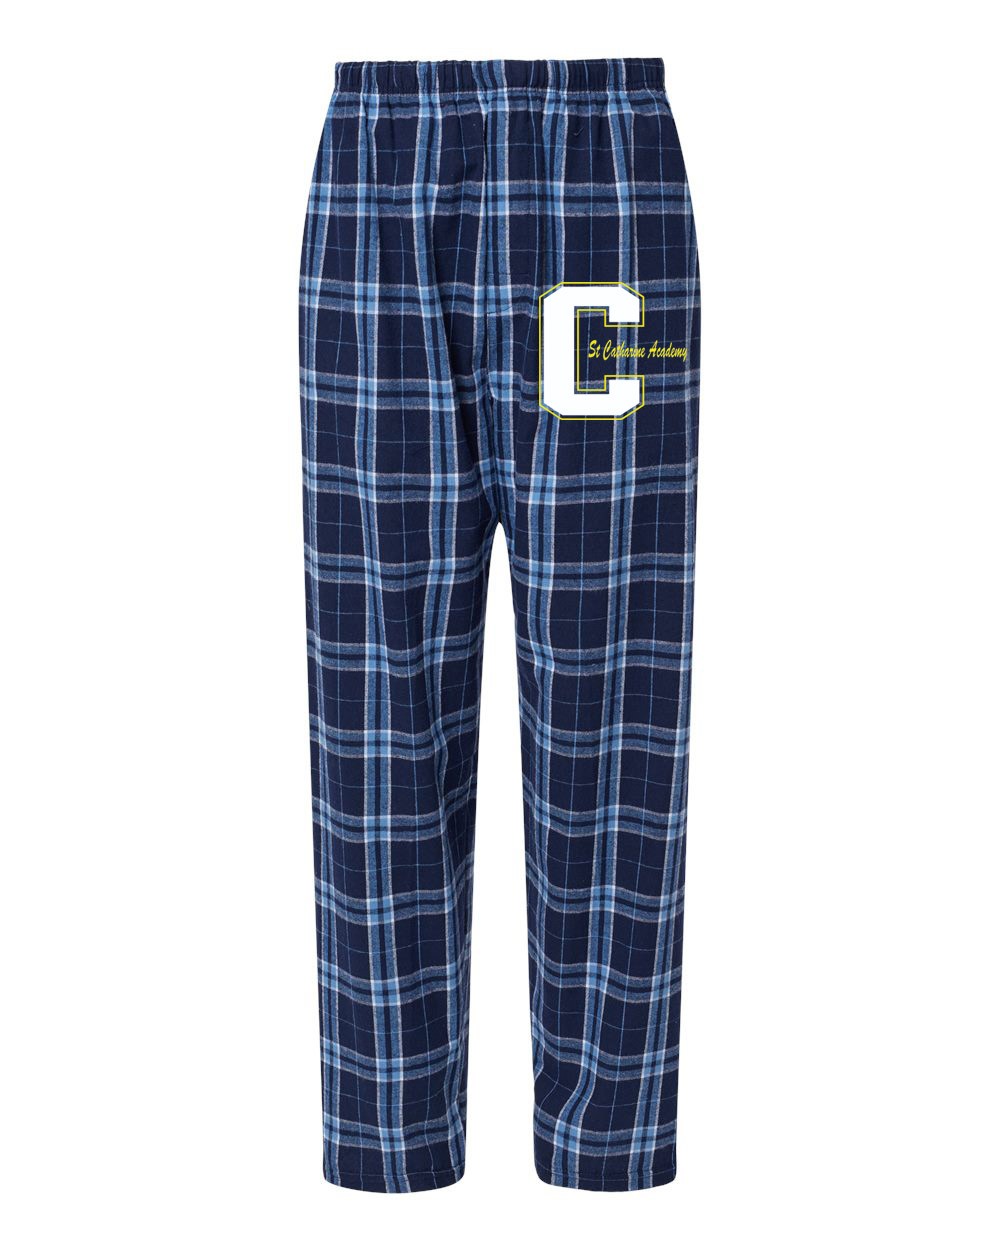 STAFF CAT Pajama Pant w/ Logo - Please allow 2-3 Weeks for Delivery